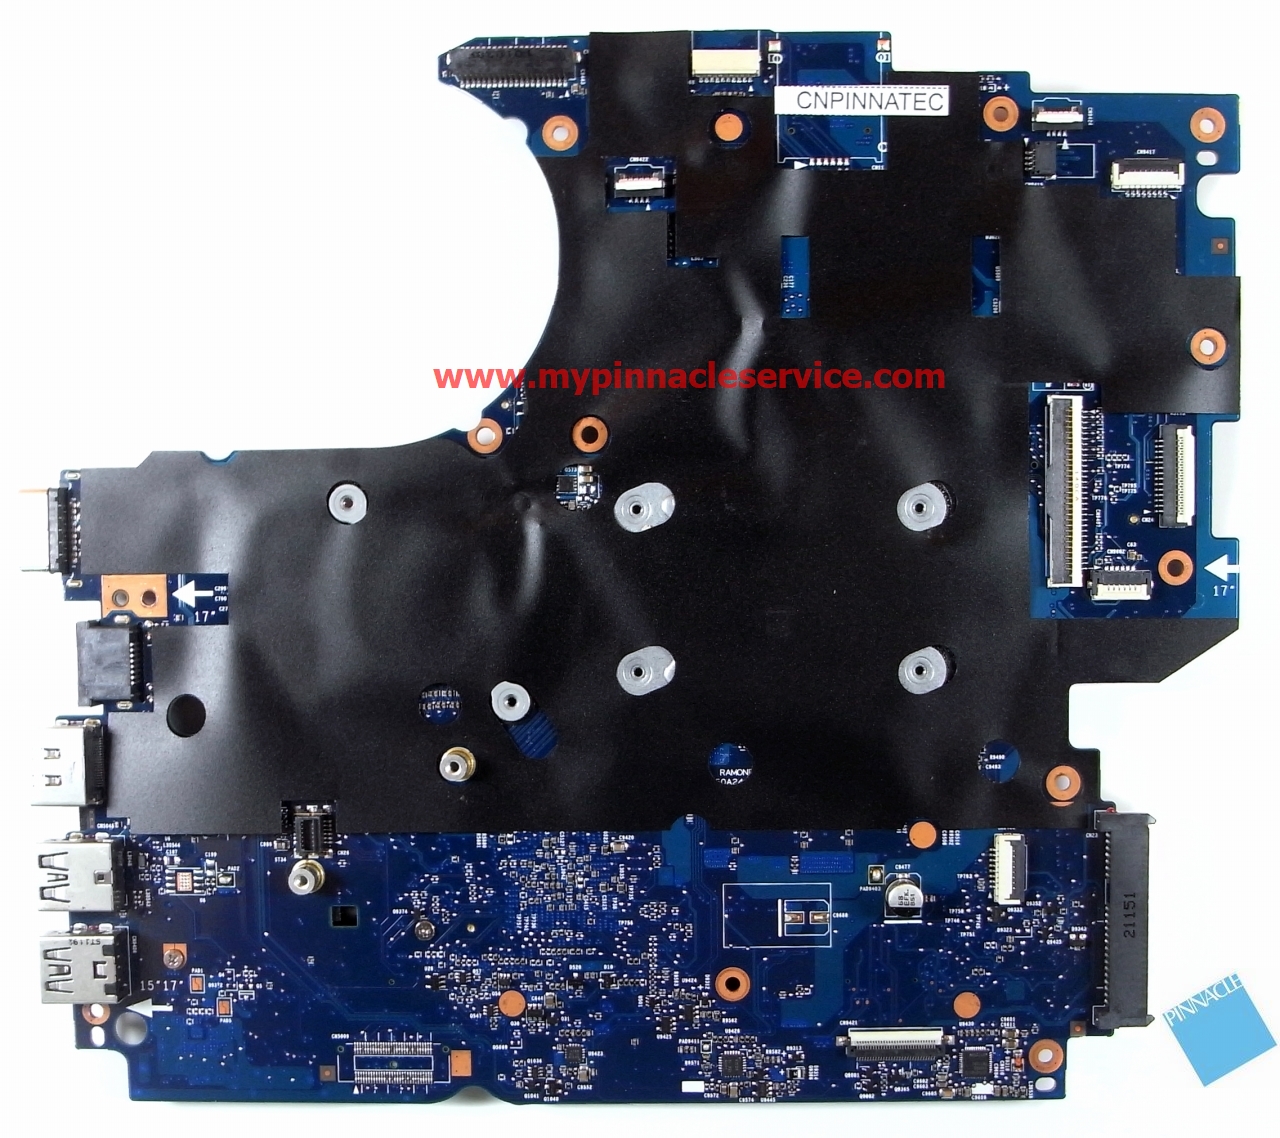 670795-001-658343-001-motherboard-for-hp-probook-4530s-4730s-6050a2465501-r0012750.jpg